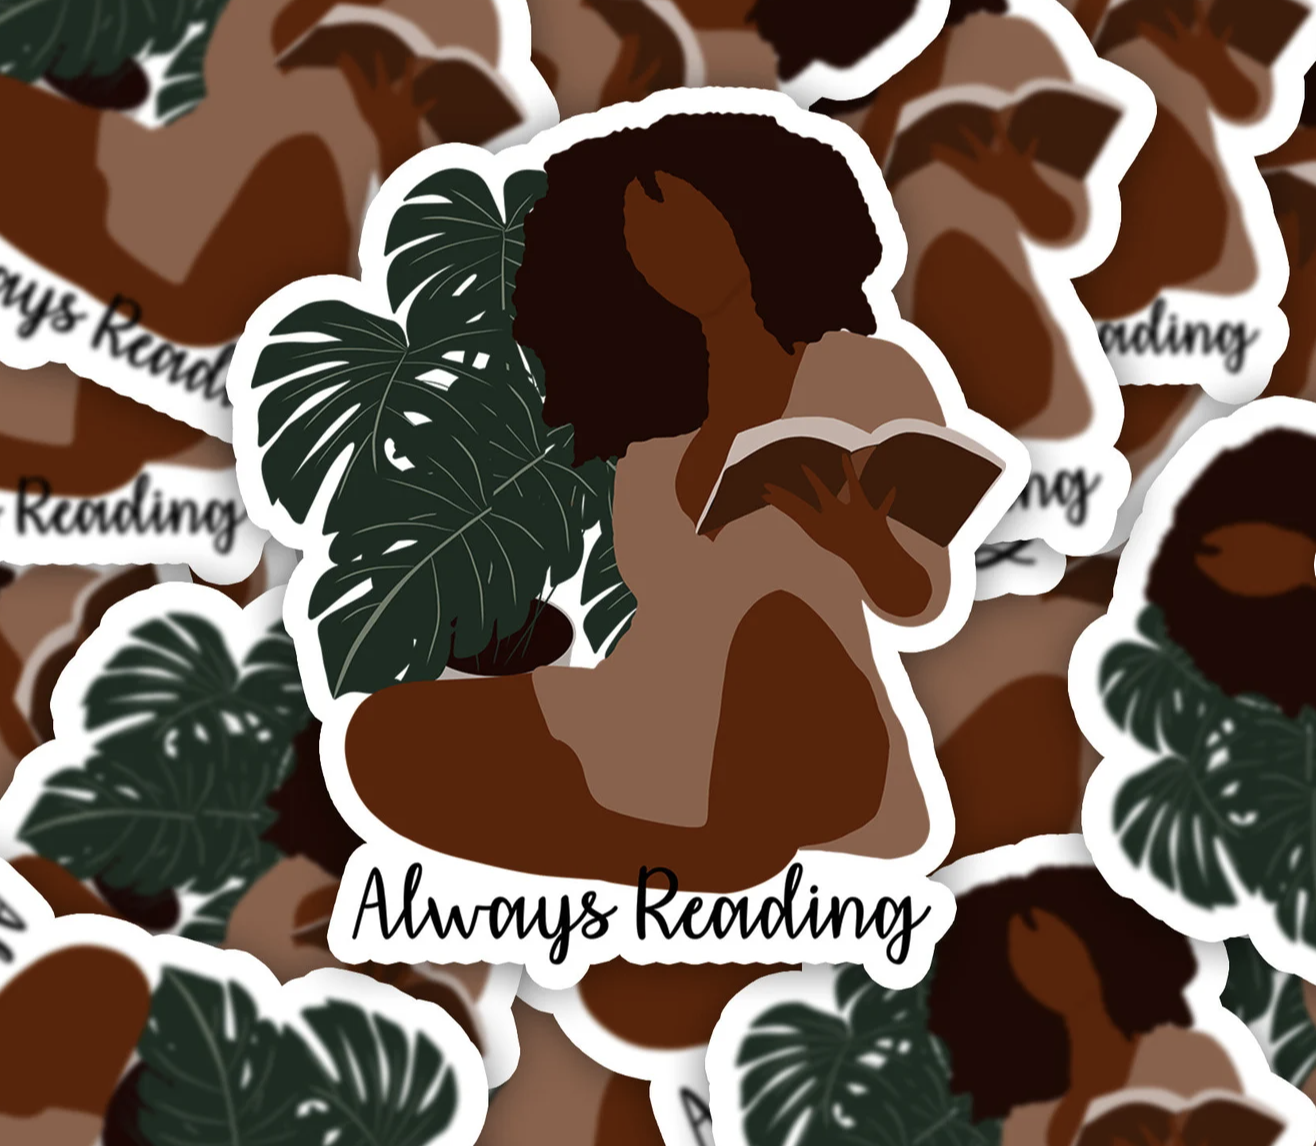 Sticker with a brown-skinned Black woman figure in a tan dress. Sicker is captioned "always reading"